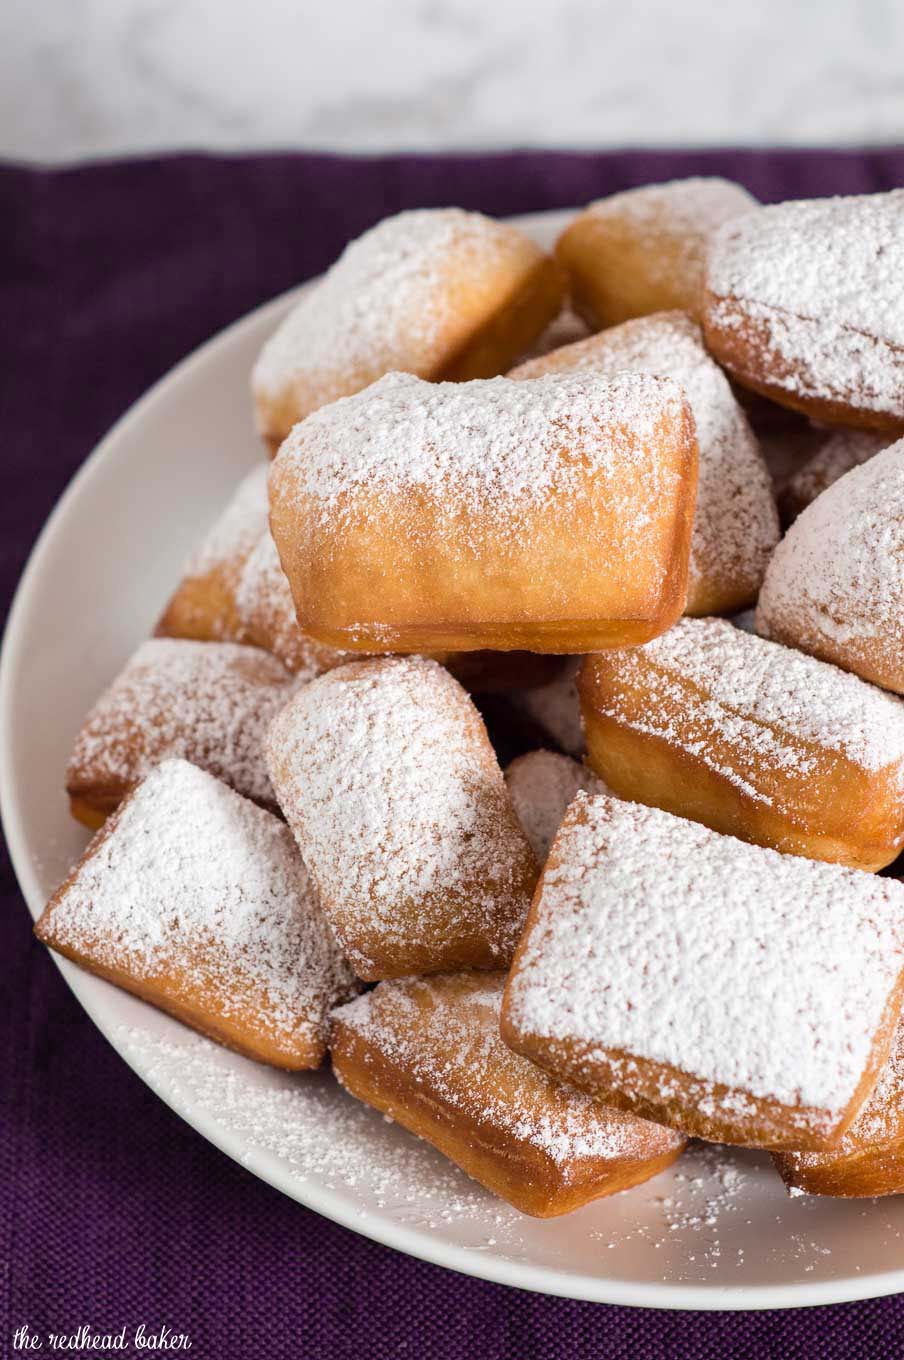 Mardi Gras means it's time for beignets! This is a classic New Orleans recipe, deep-fried then coated in powdered sugar, and served with raspberry jam. 